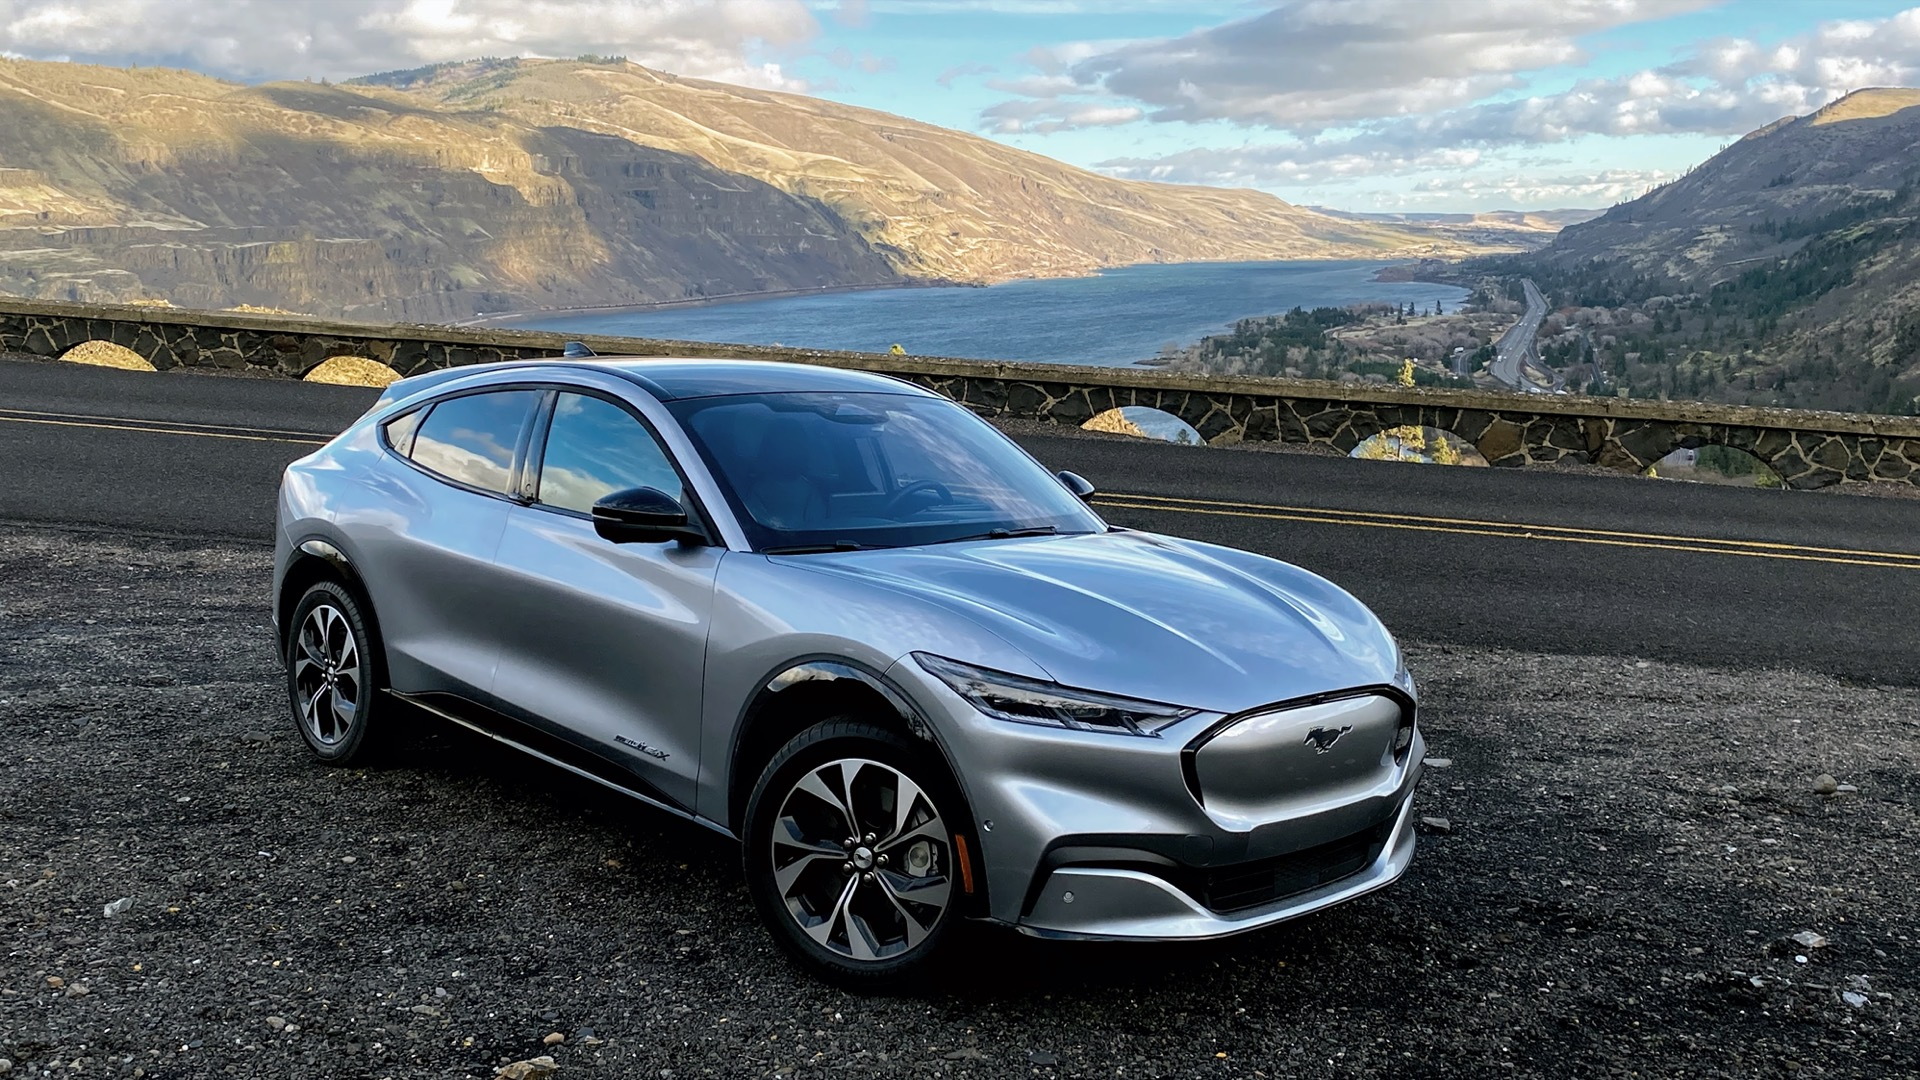 2021 Ford Mustang Electric Car